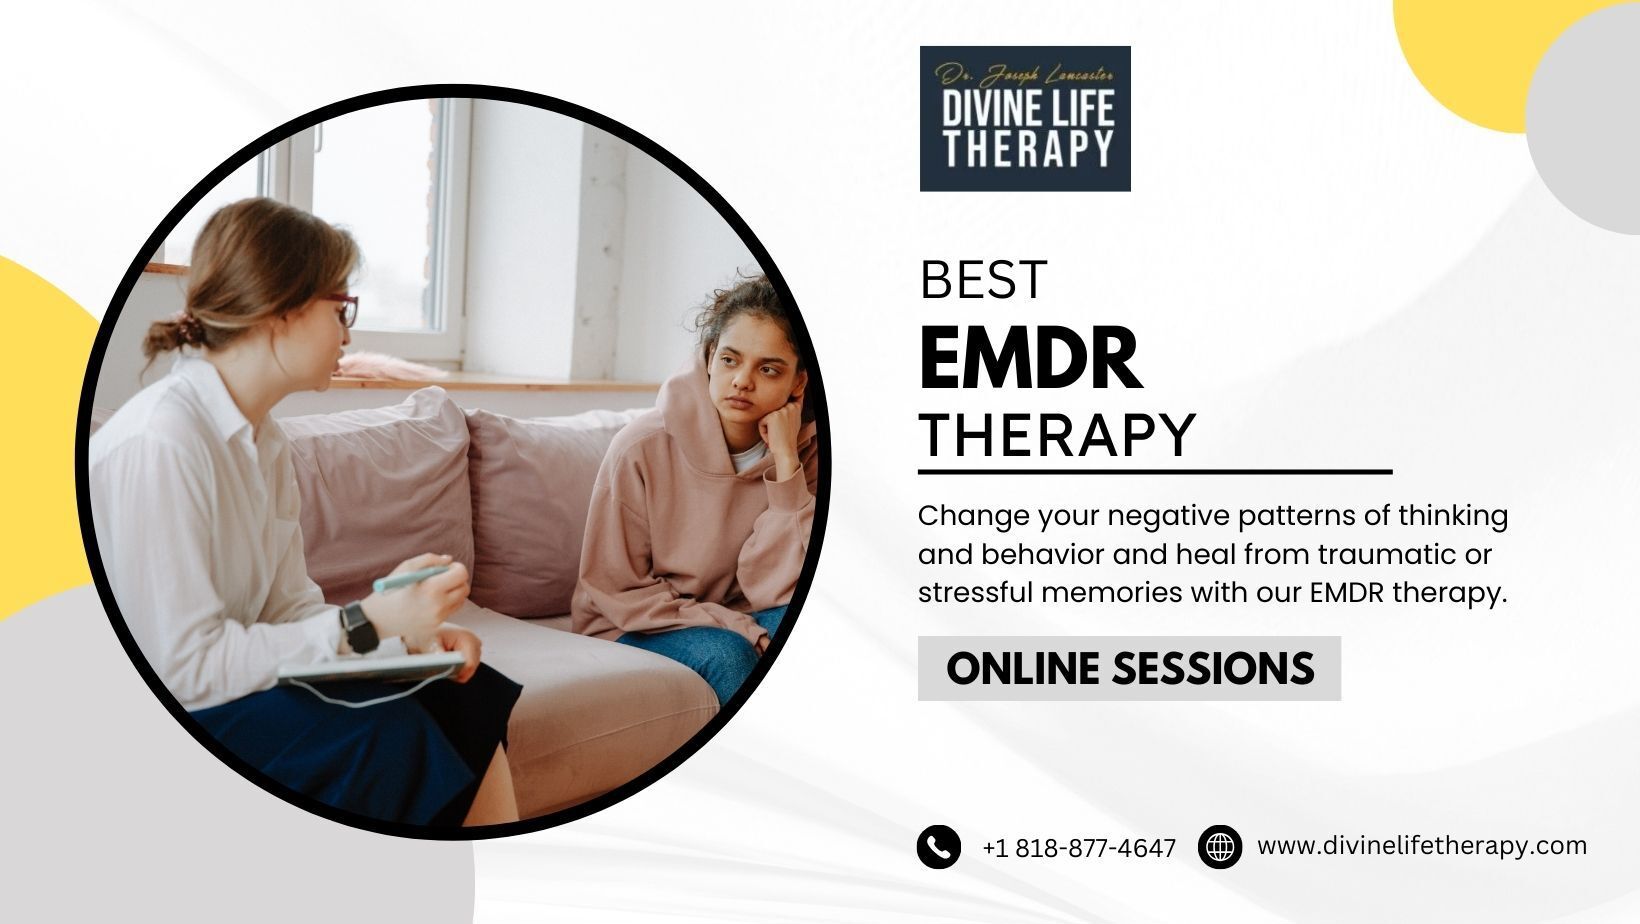 Get Rid of Emotional Suffering with EMDR Therapy